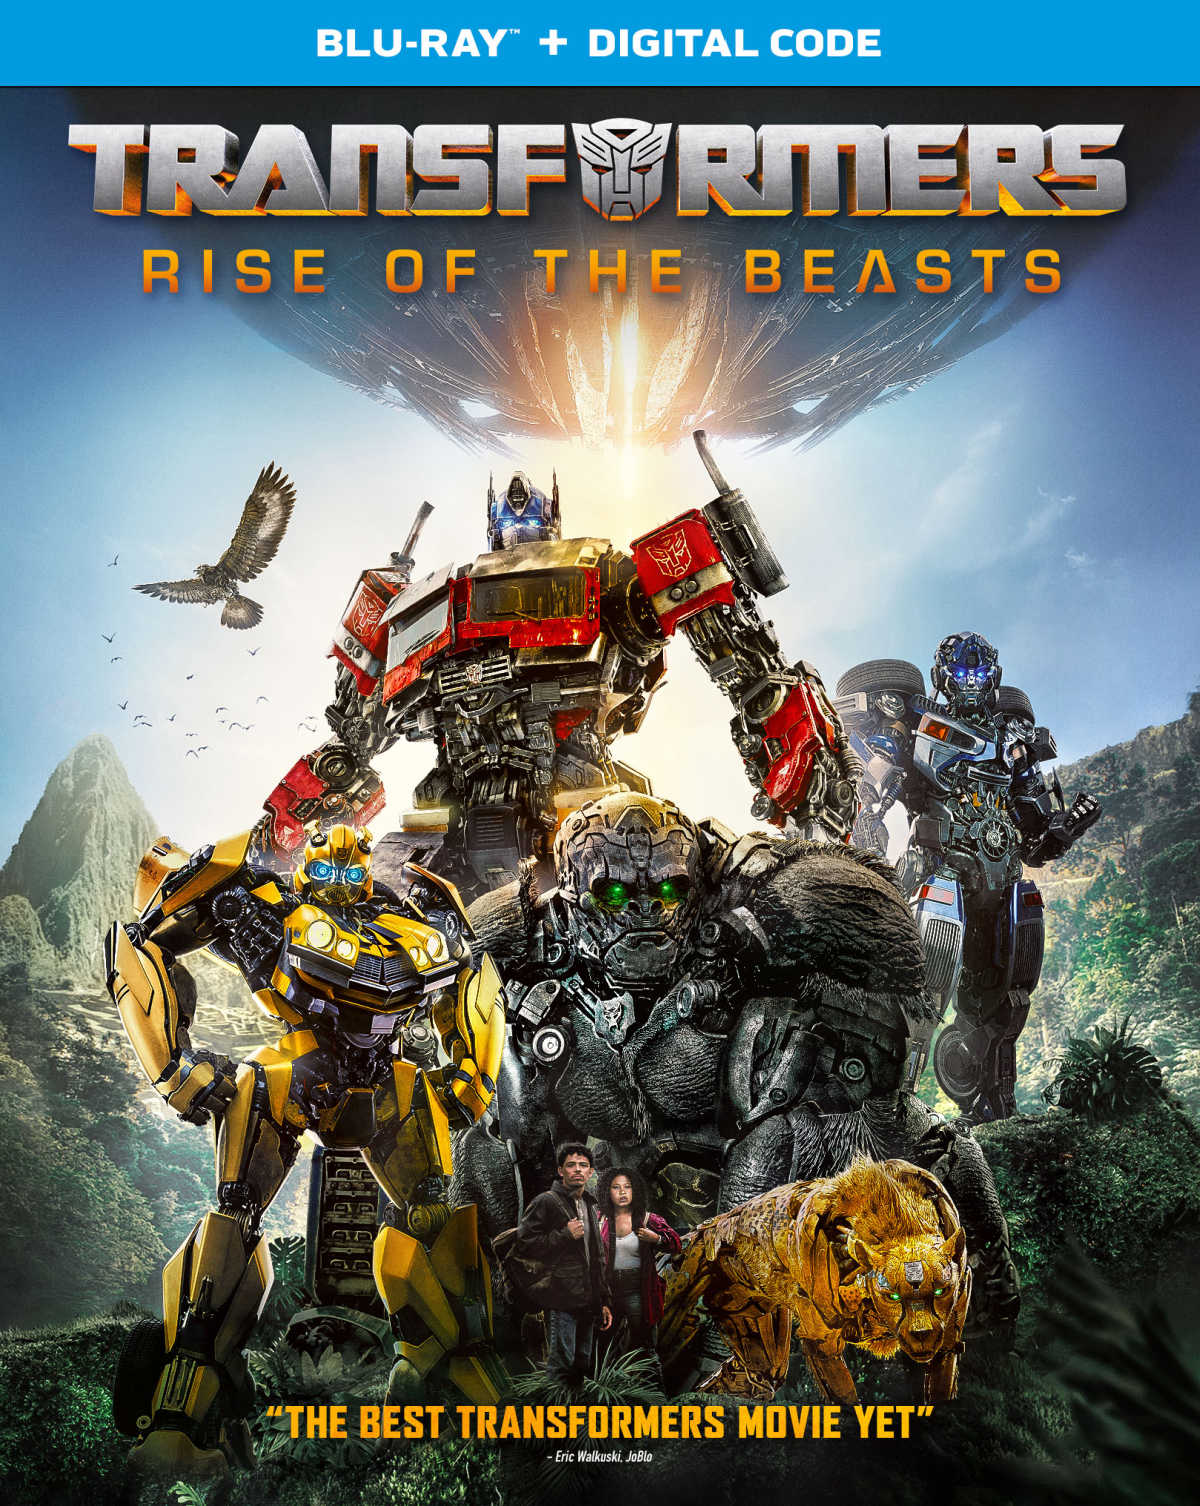 Transformers: Rise of the Beasts is a thrilling new era for the franchise, with intense action, entertaining human interaction, and a nostalgic return to the '90s.